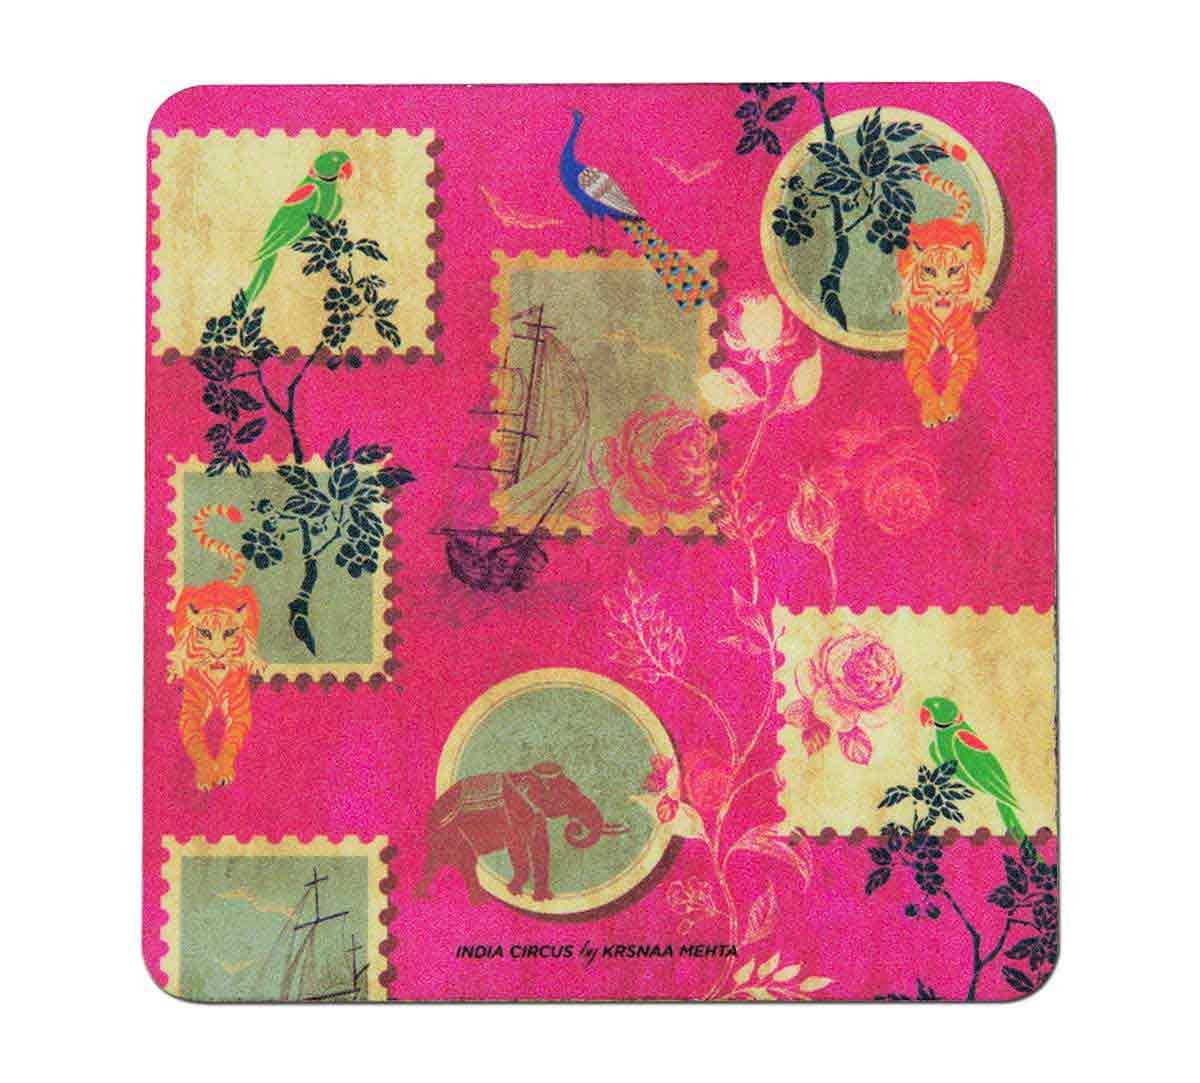 India Circus Wildlife Stamps Table Coaster Set of 6